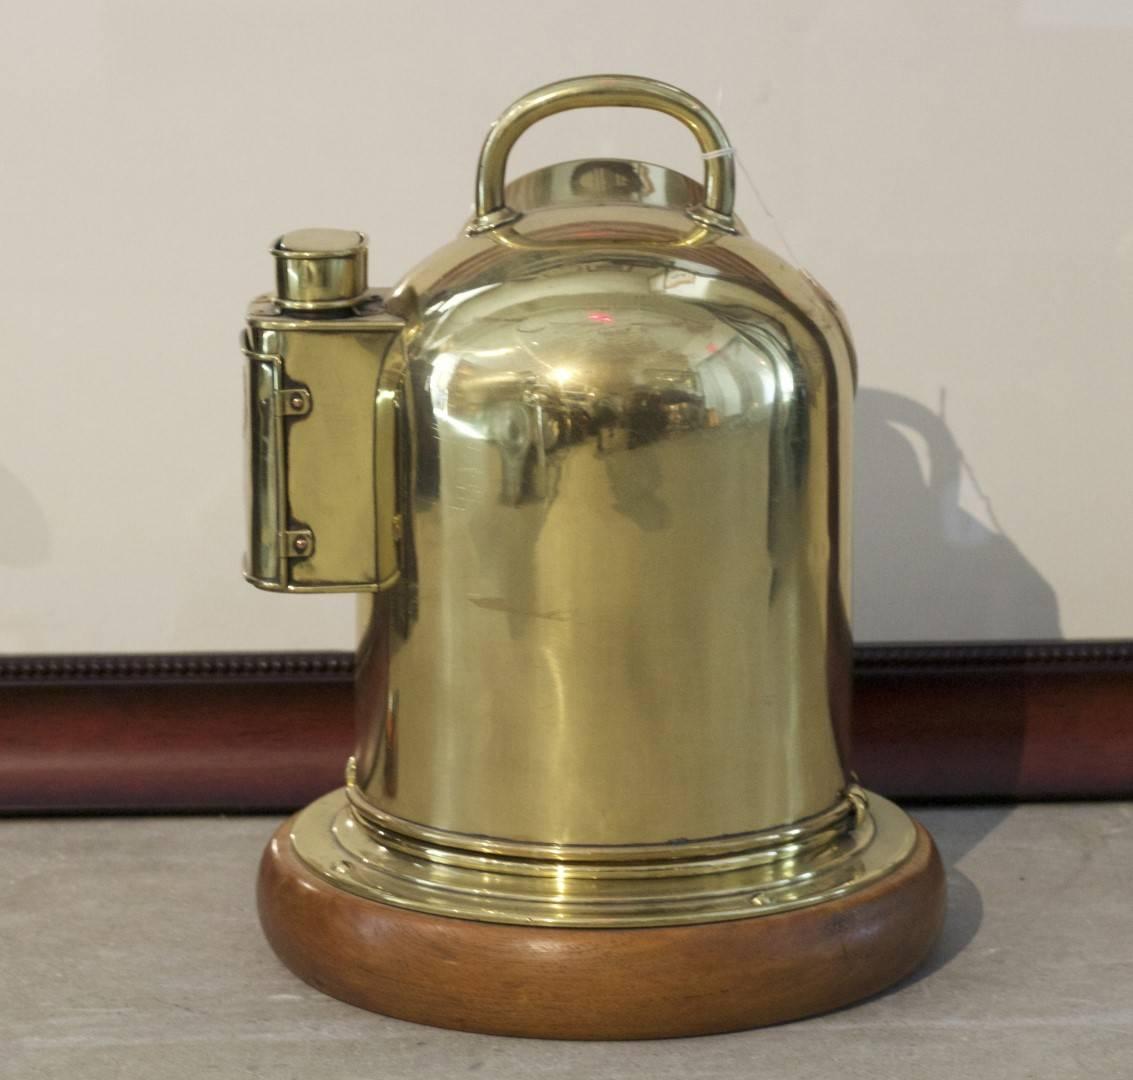 Antique brass yacht binnacle by Sestrel, mounted to a wood base. Dimensions: 16